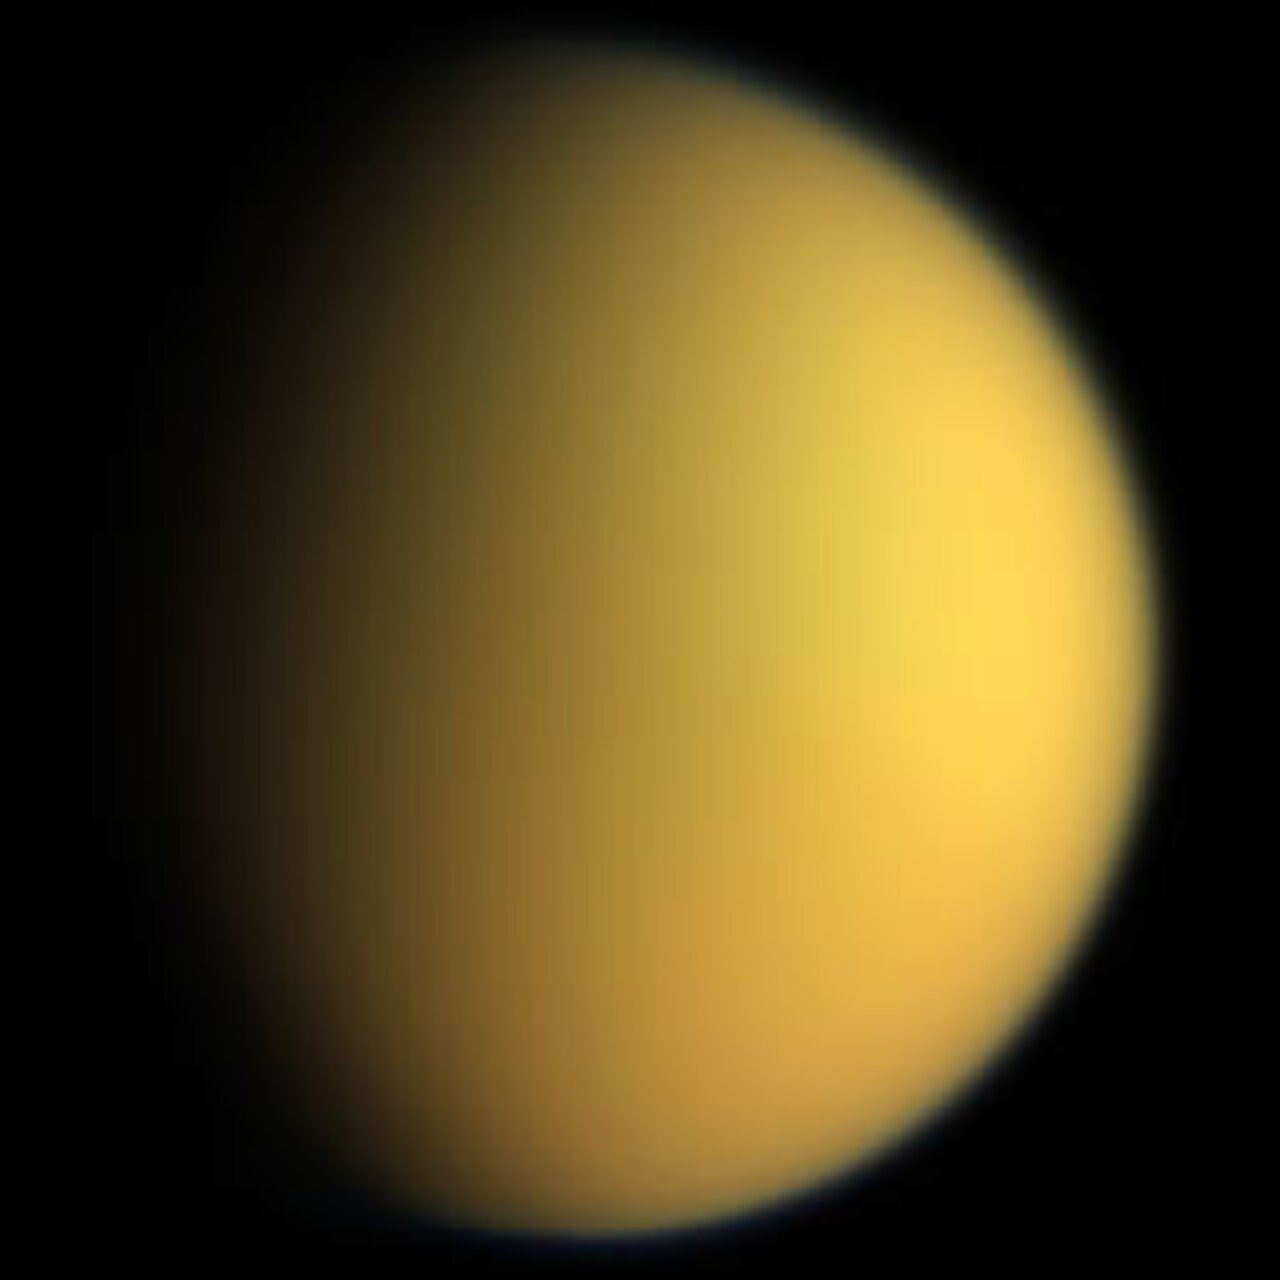 Titan, the second largest moon in the solar system